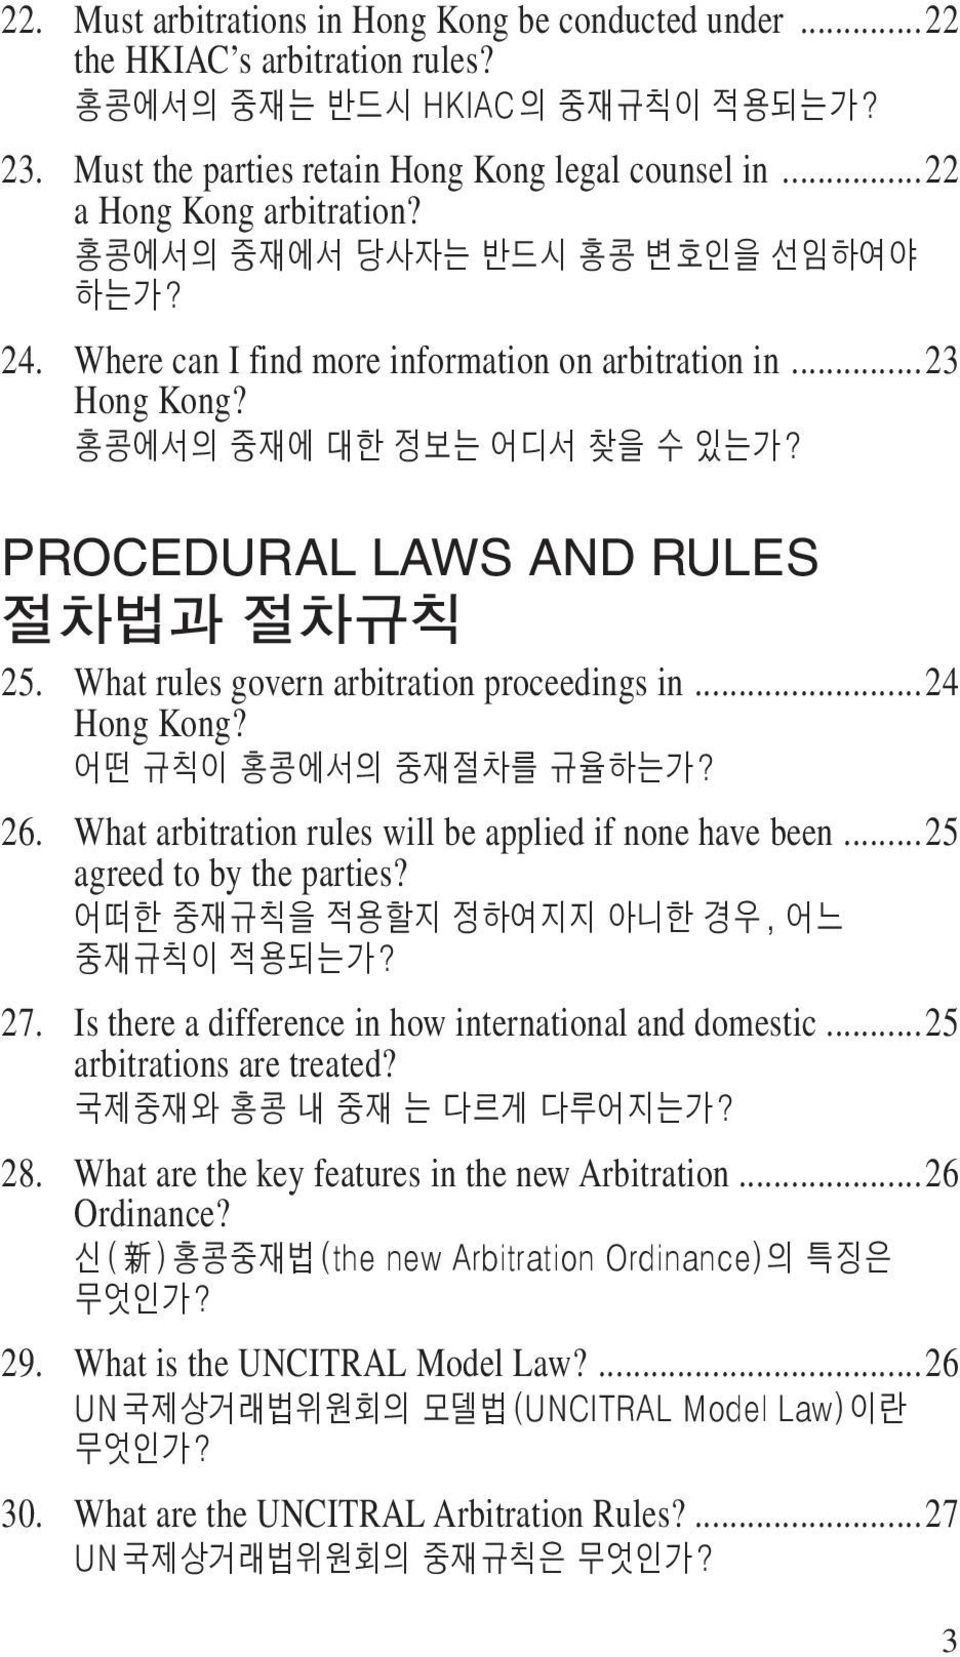 Procedural Laws and Rules 절차법과 절차규칙 25. What rules govern arbitration proceedings in...24 Hong Kong? 어떤 규칙이 홍콩에서의 중재절차를 규율하는가? 26. What arbitration rules will be applied if none have been.